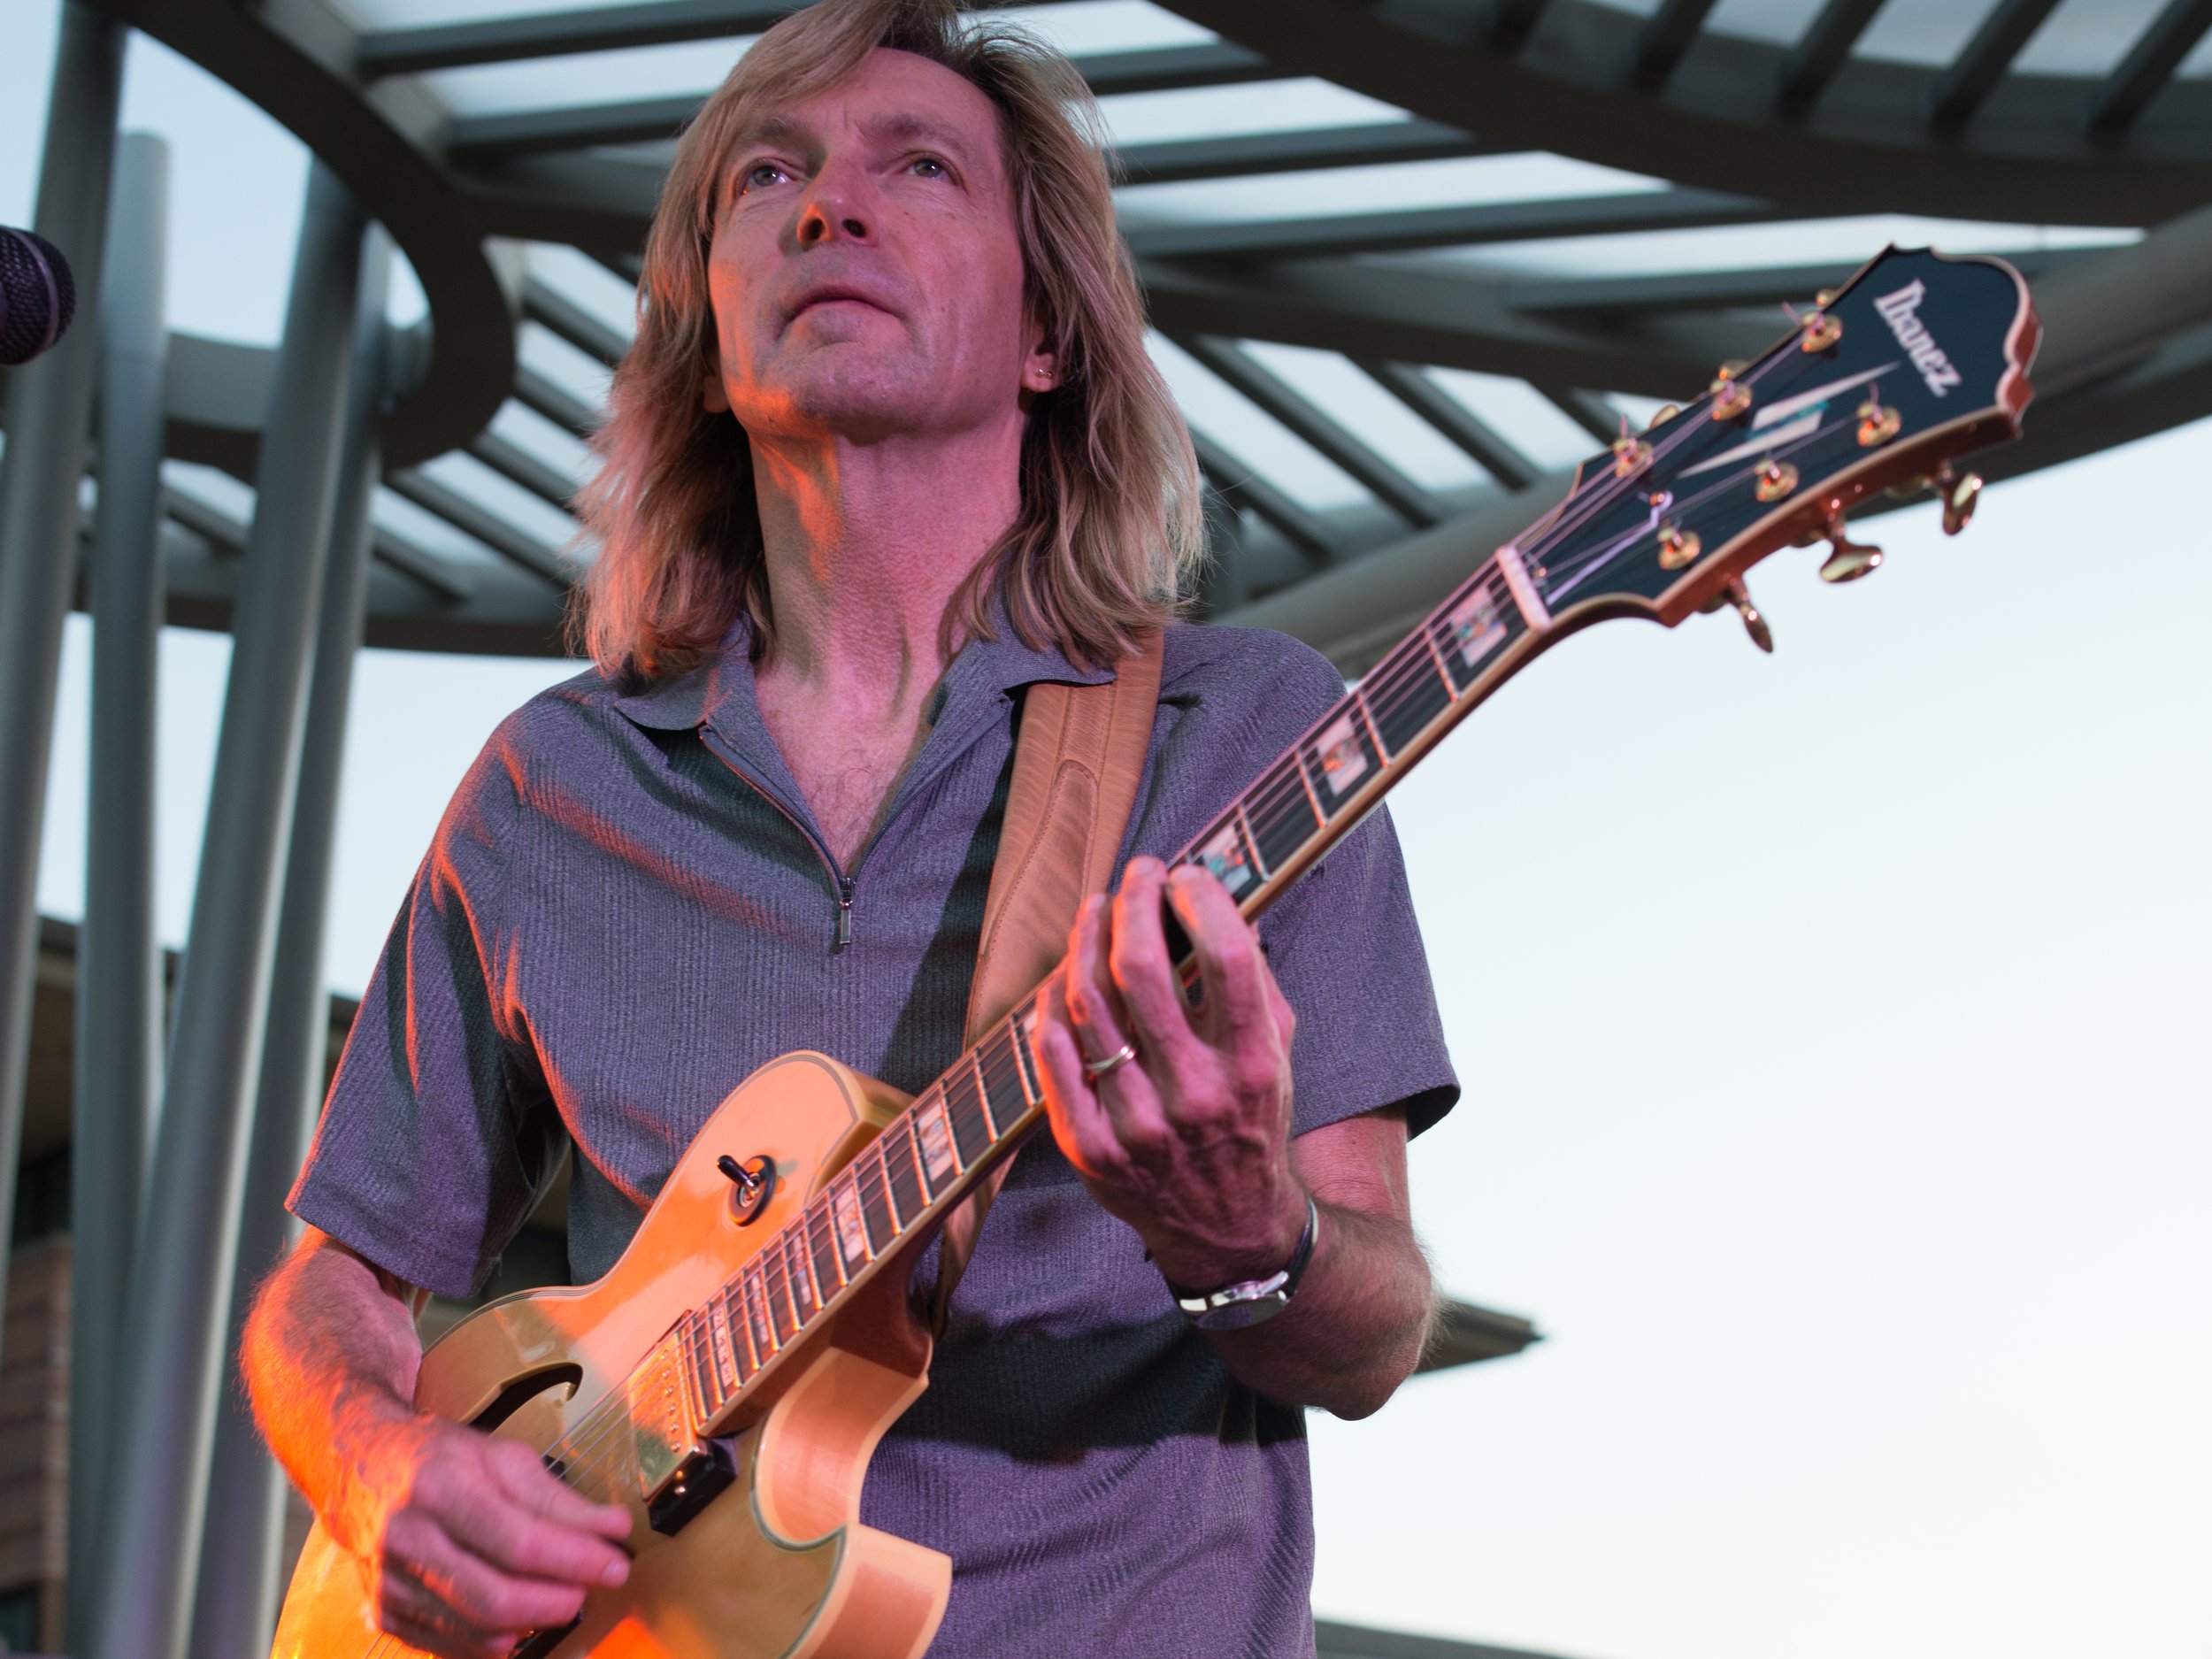    Bill Sickles performs on electric guitar at an outdoor event in Denver Colorado.   